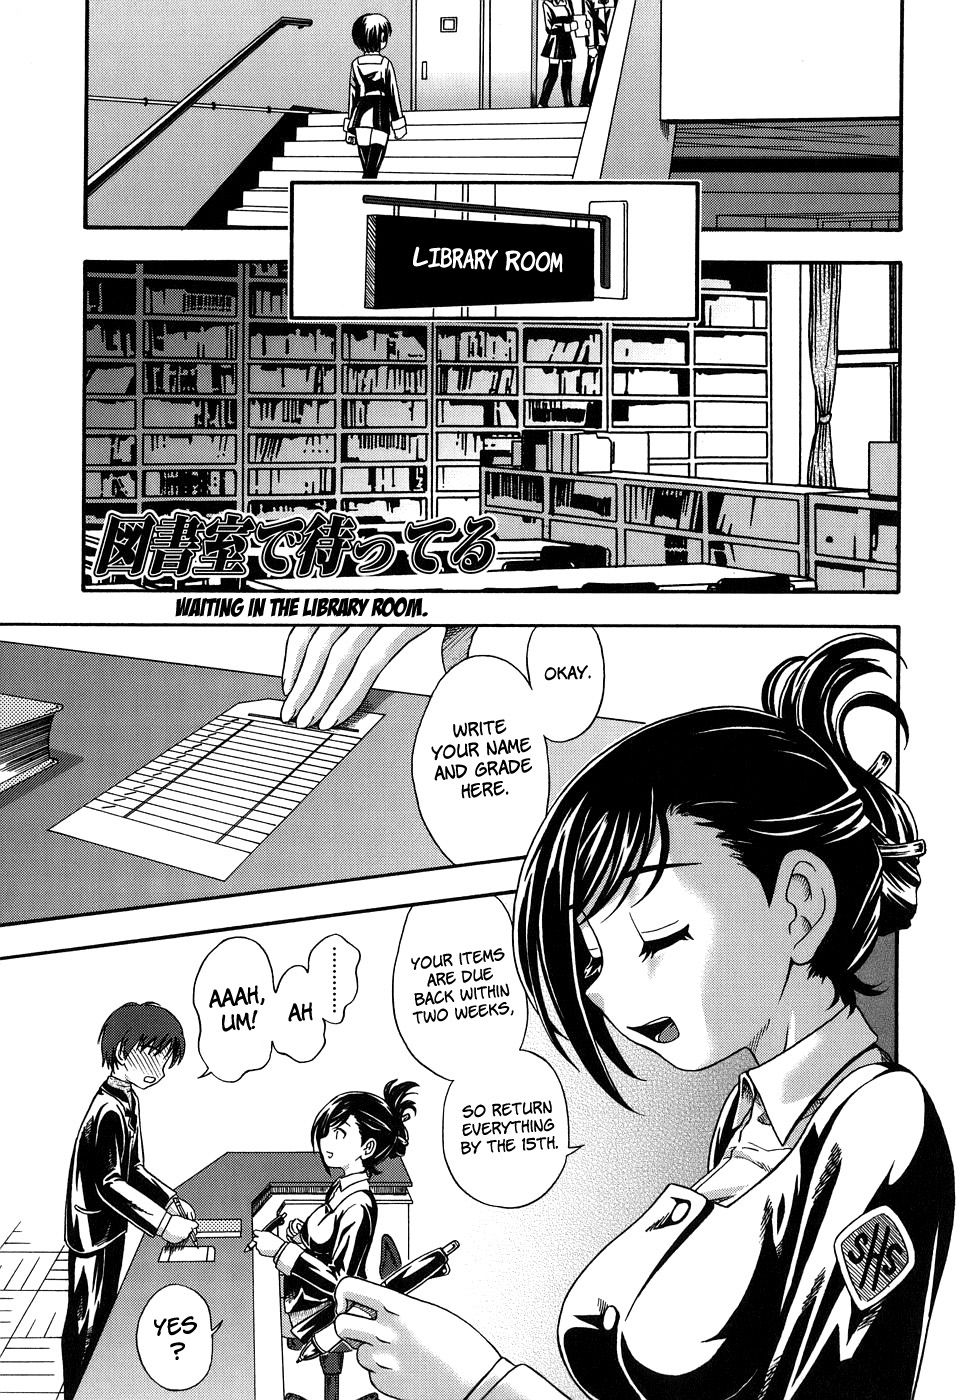 Hentai Manga Comic-Love Me Do-Chapter 8-Waiting In The Library Room-1